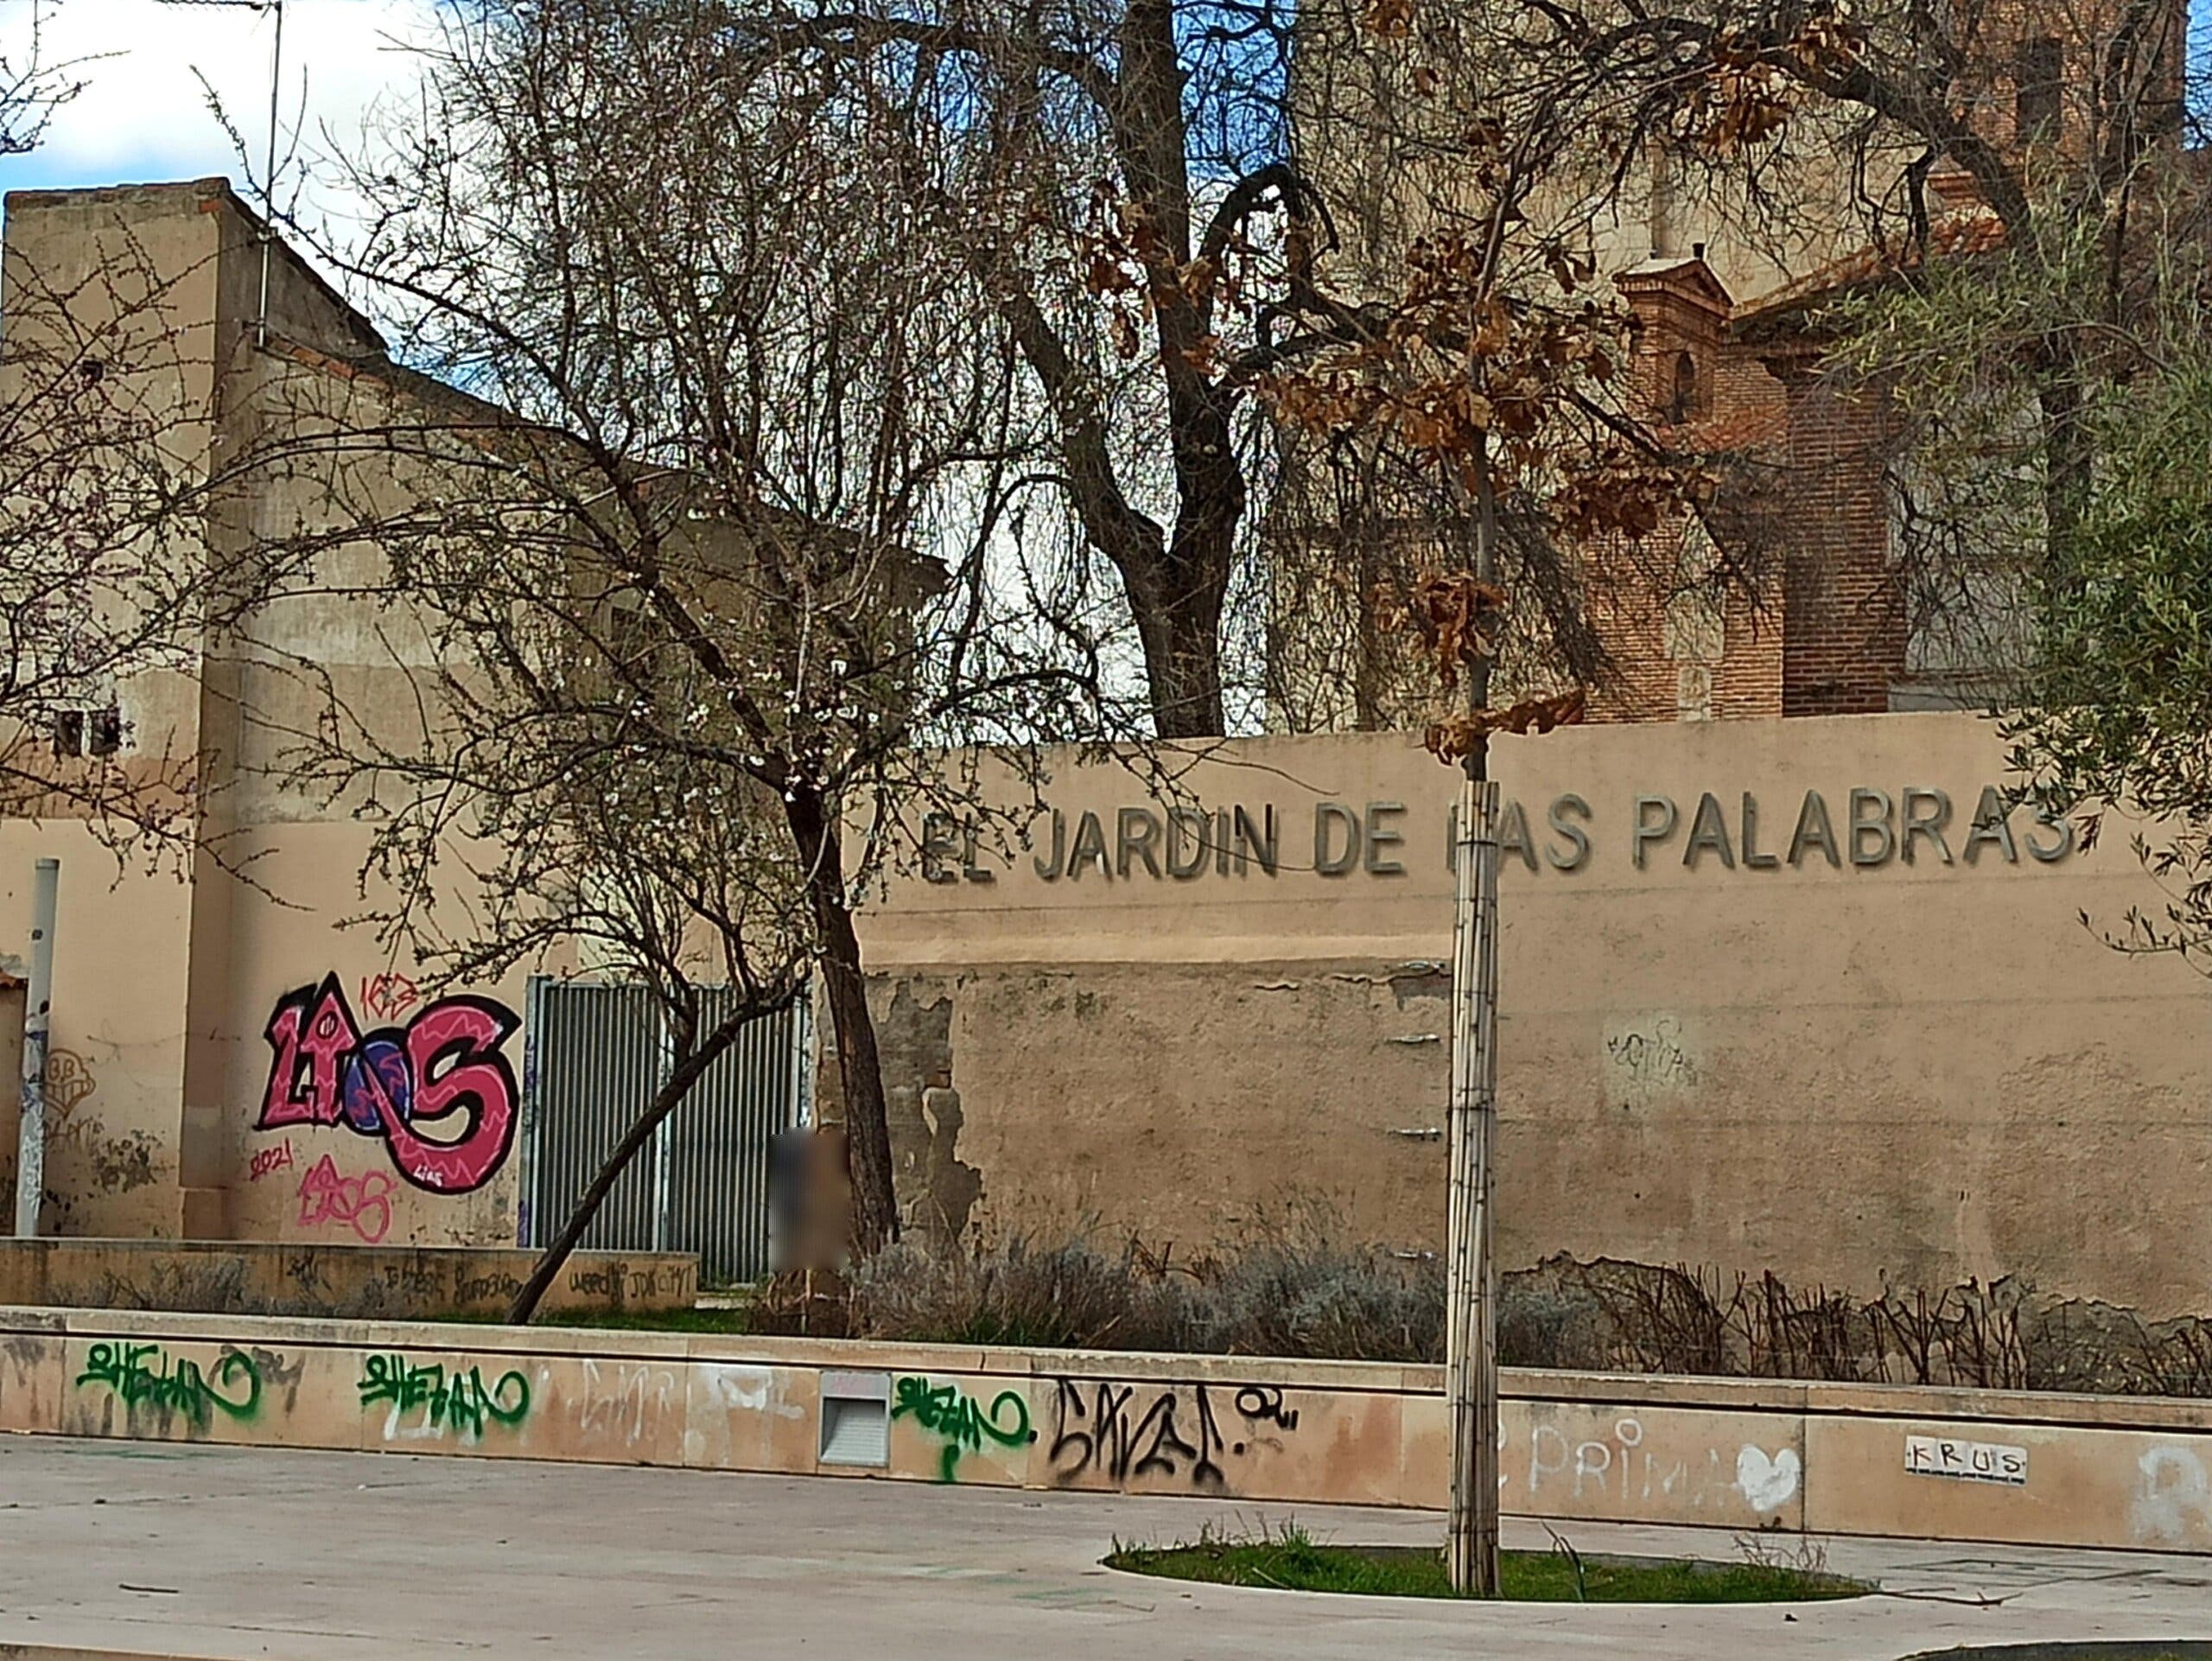 They criticize the proliferation of graffiti in an emblematic space of Alcalá de Henares MiraCorredor